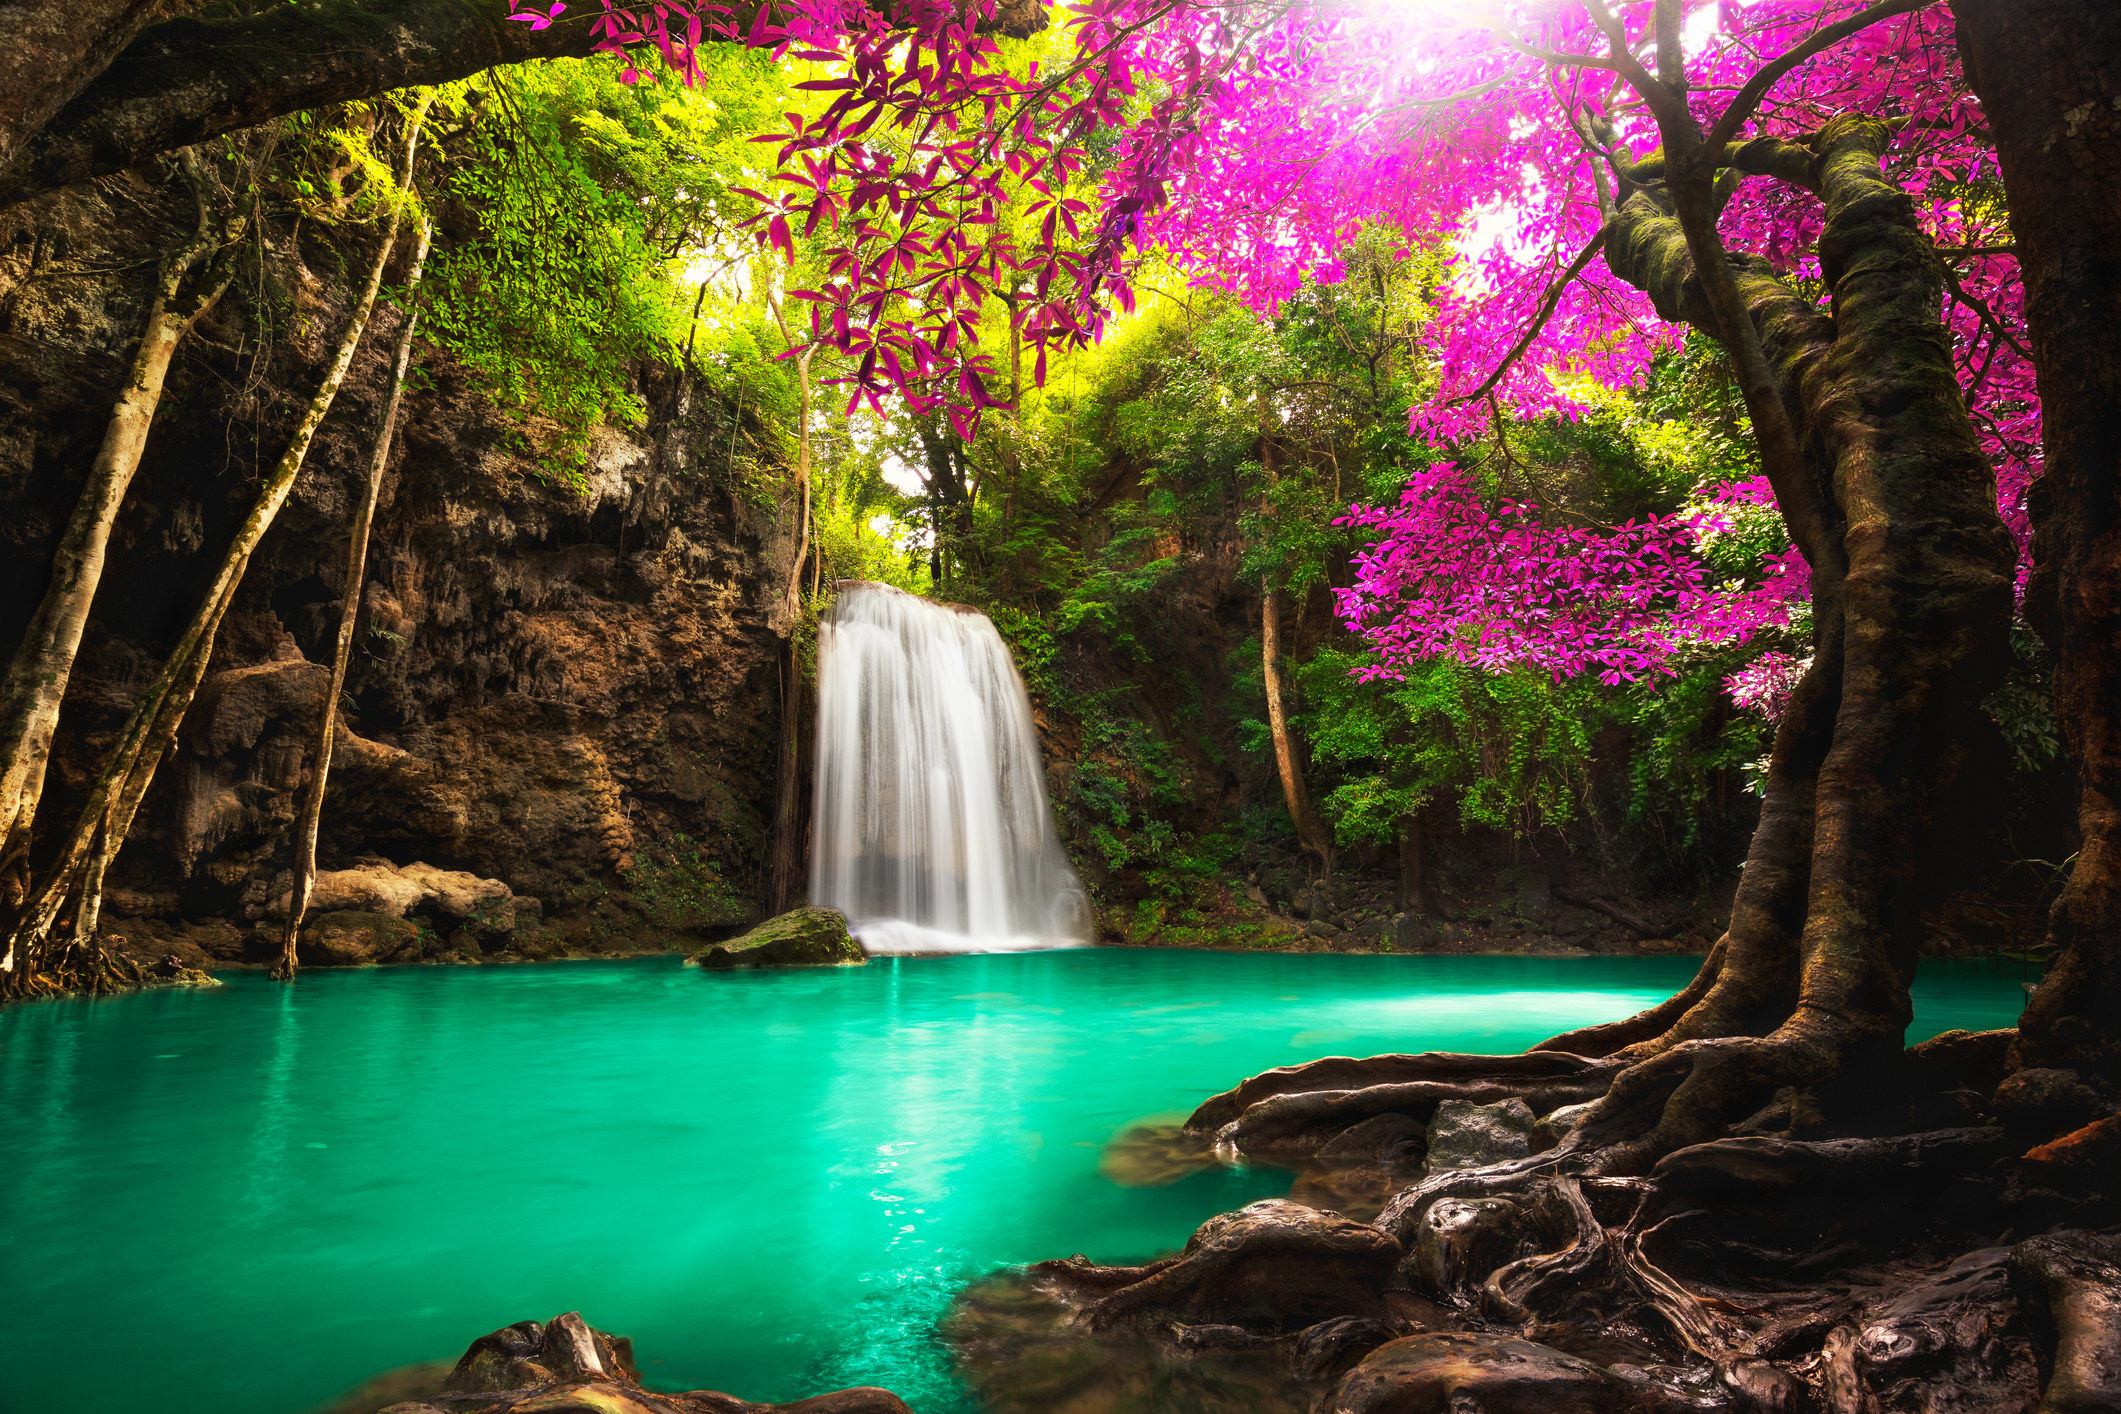 Green water with a waterfall in the background. A tree with bright pink flowers blooming, and trees everywhere, considered Elysium